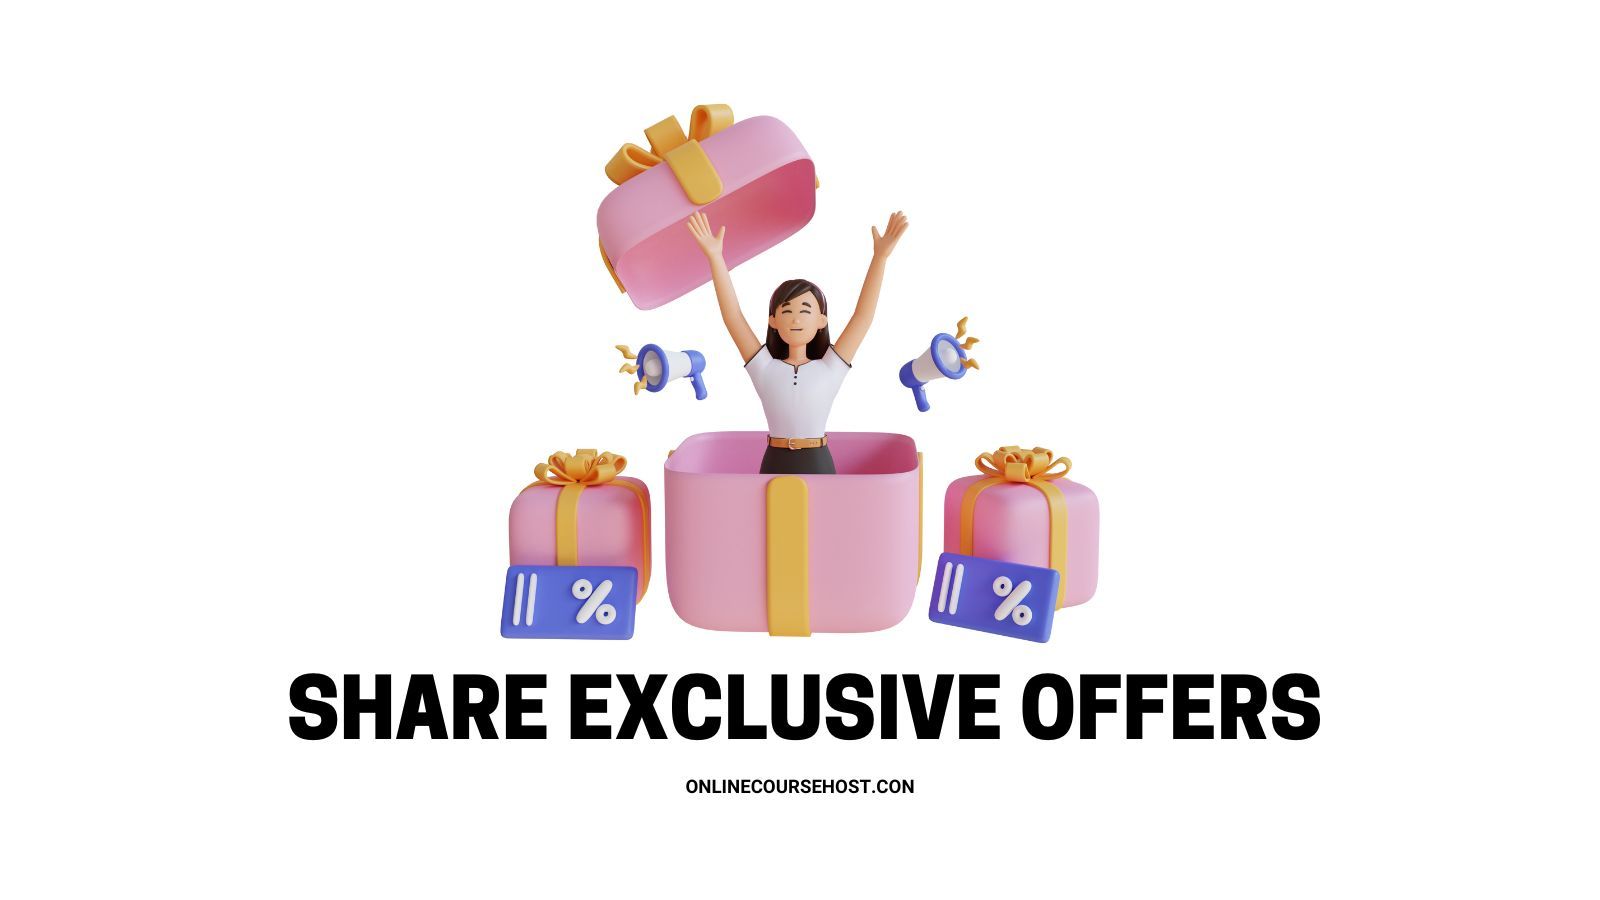 share exclusive offers with your social media followers